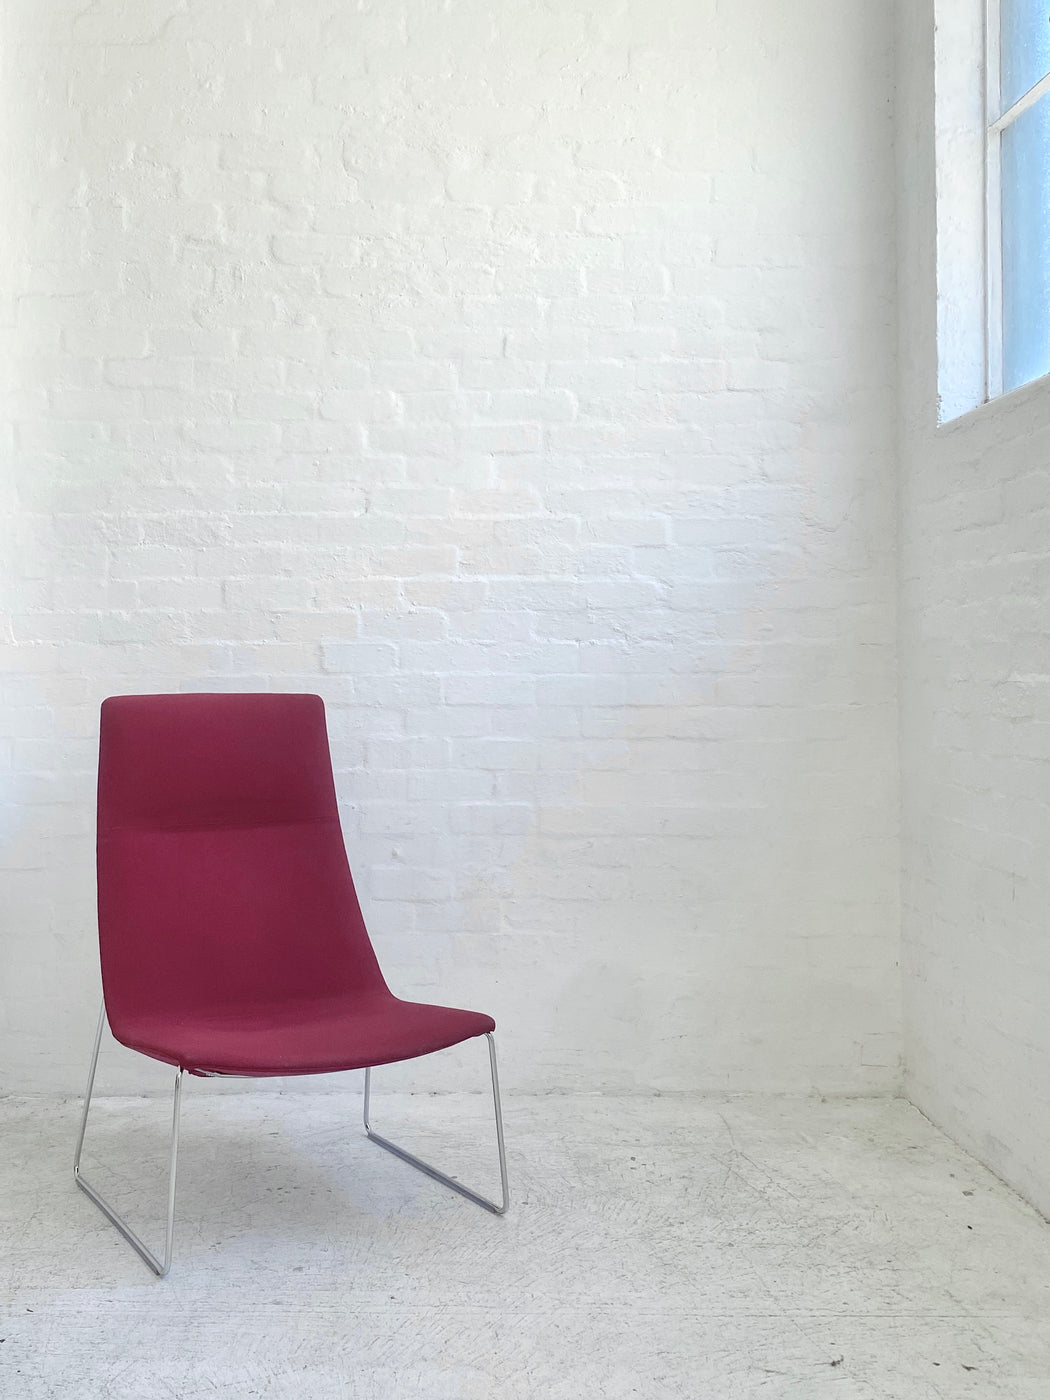 Lievore Altherr Molina 'Catifa 70 Sled' Chair